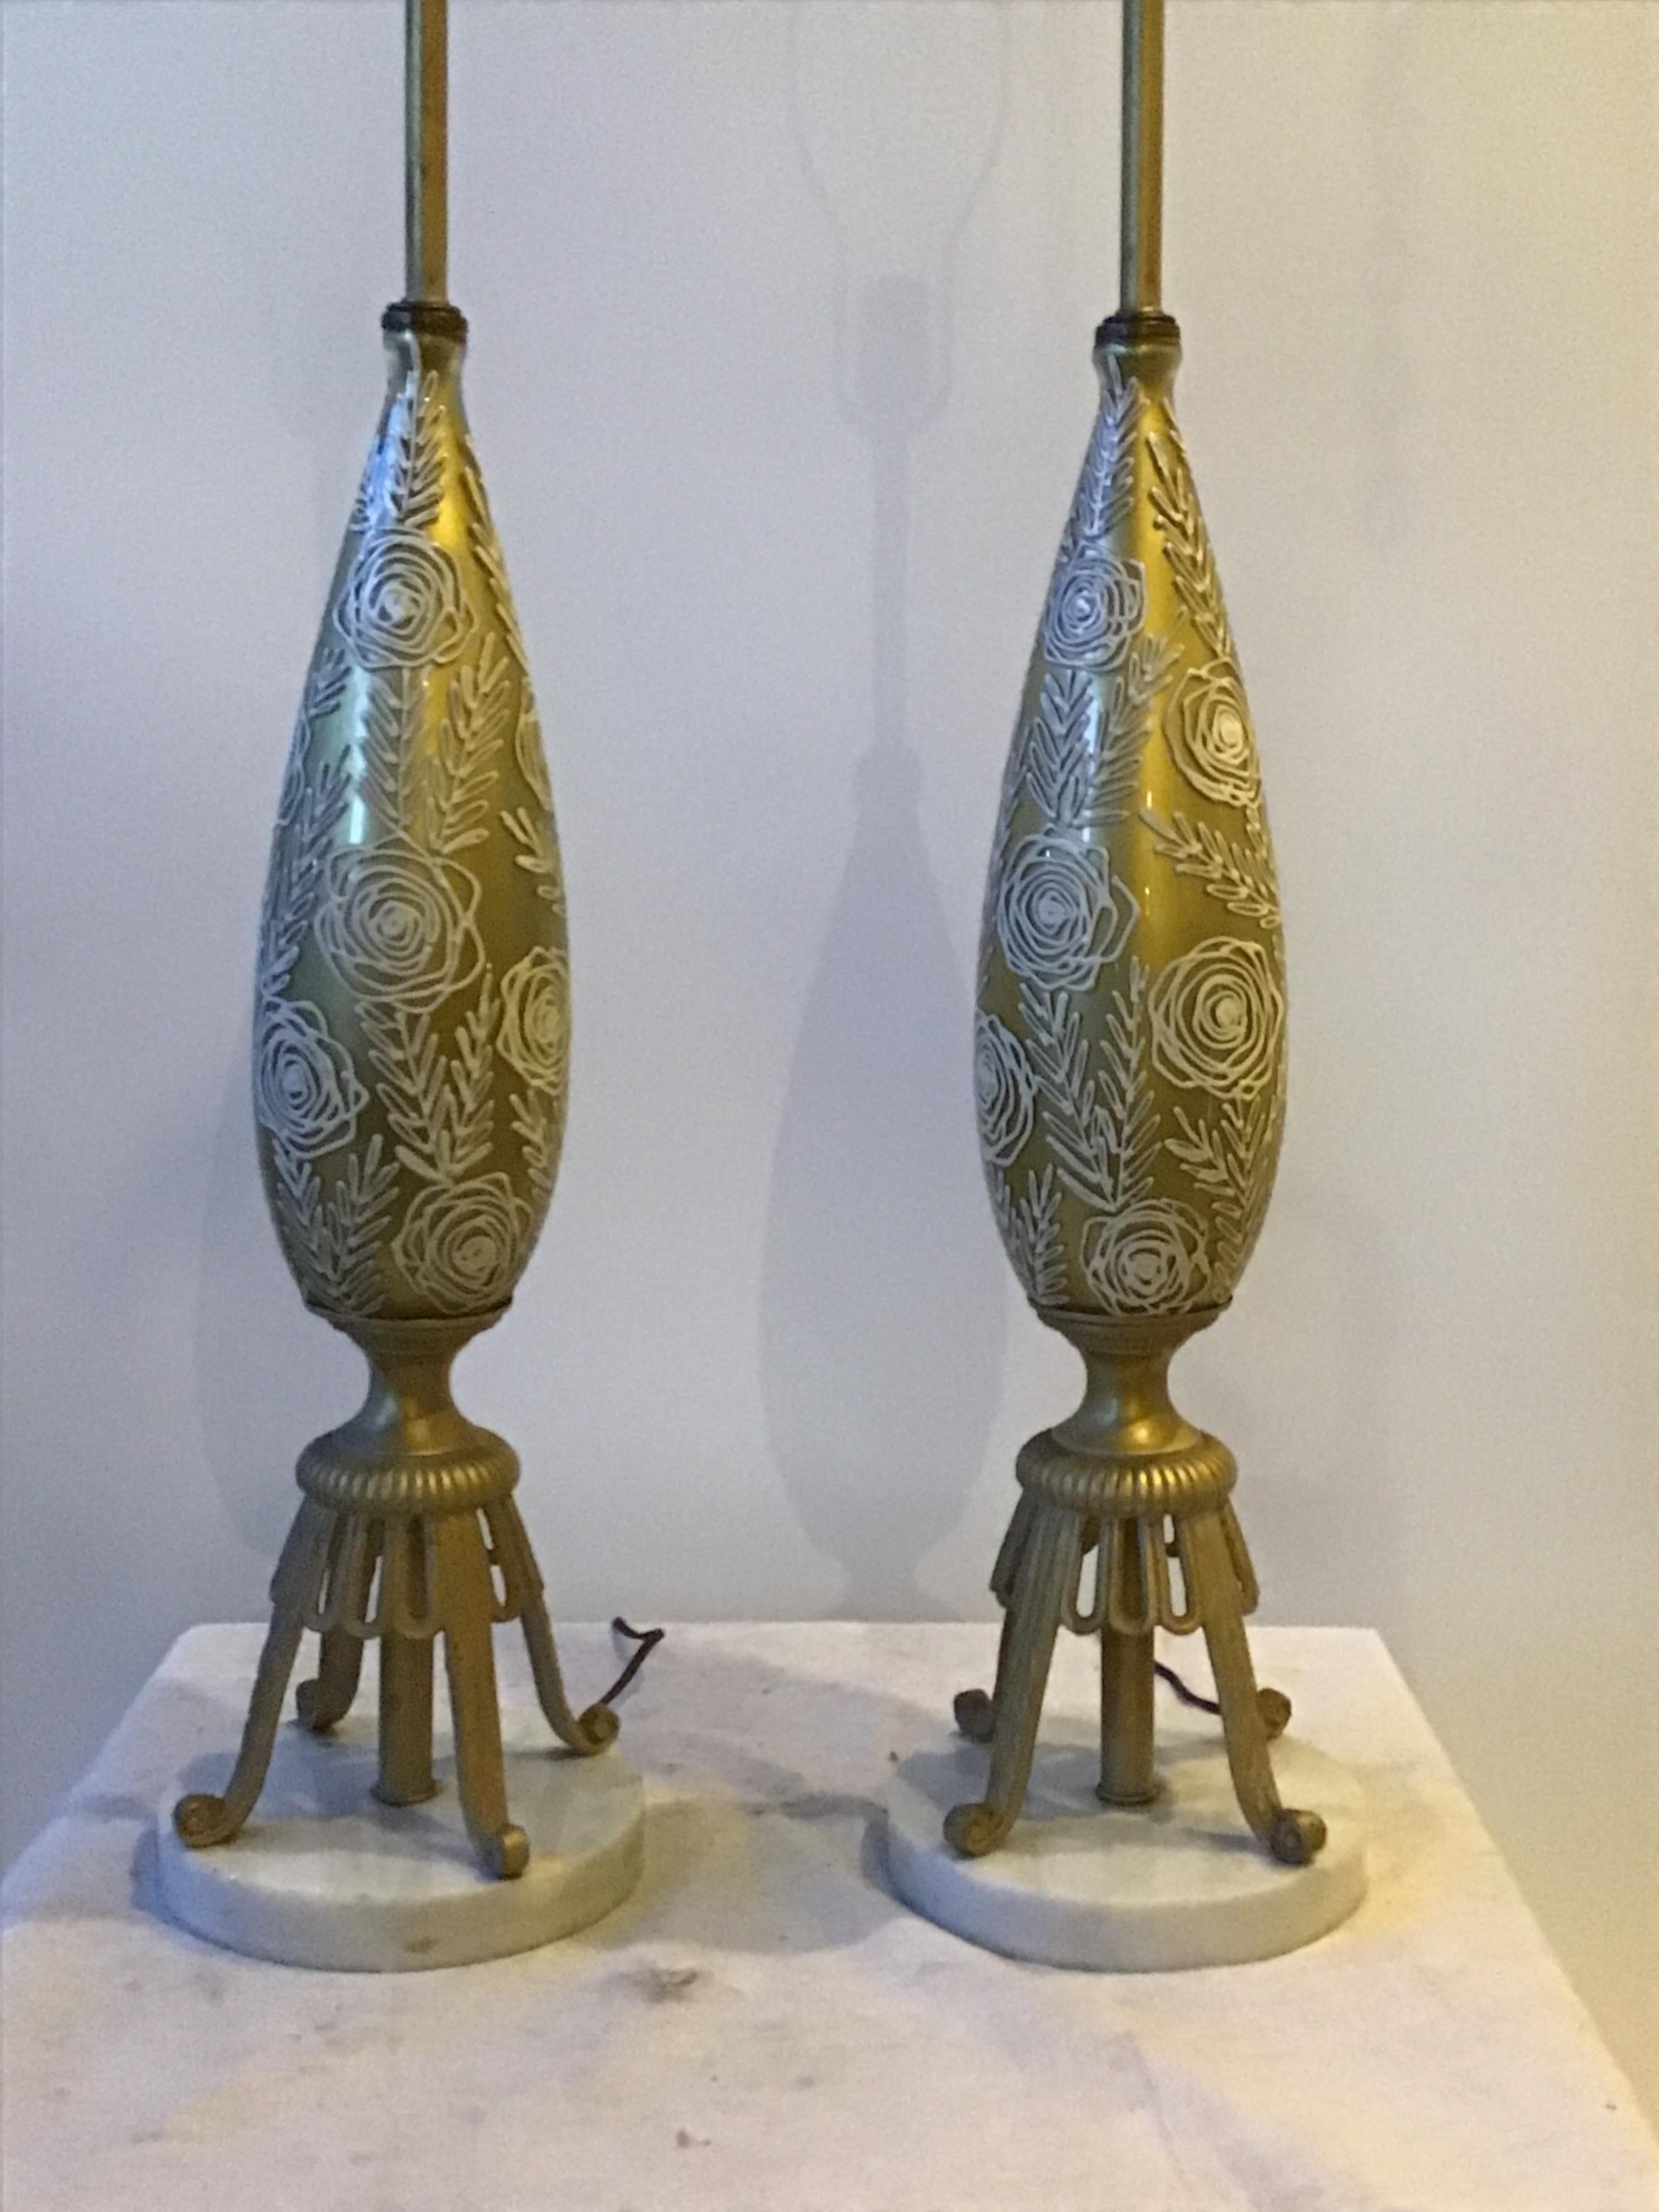 Pair of 1950s gold glass lamps with raised floral design. Marble base.